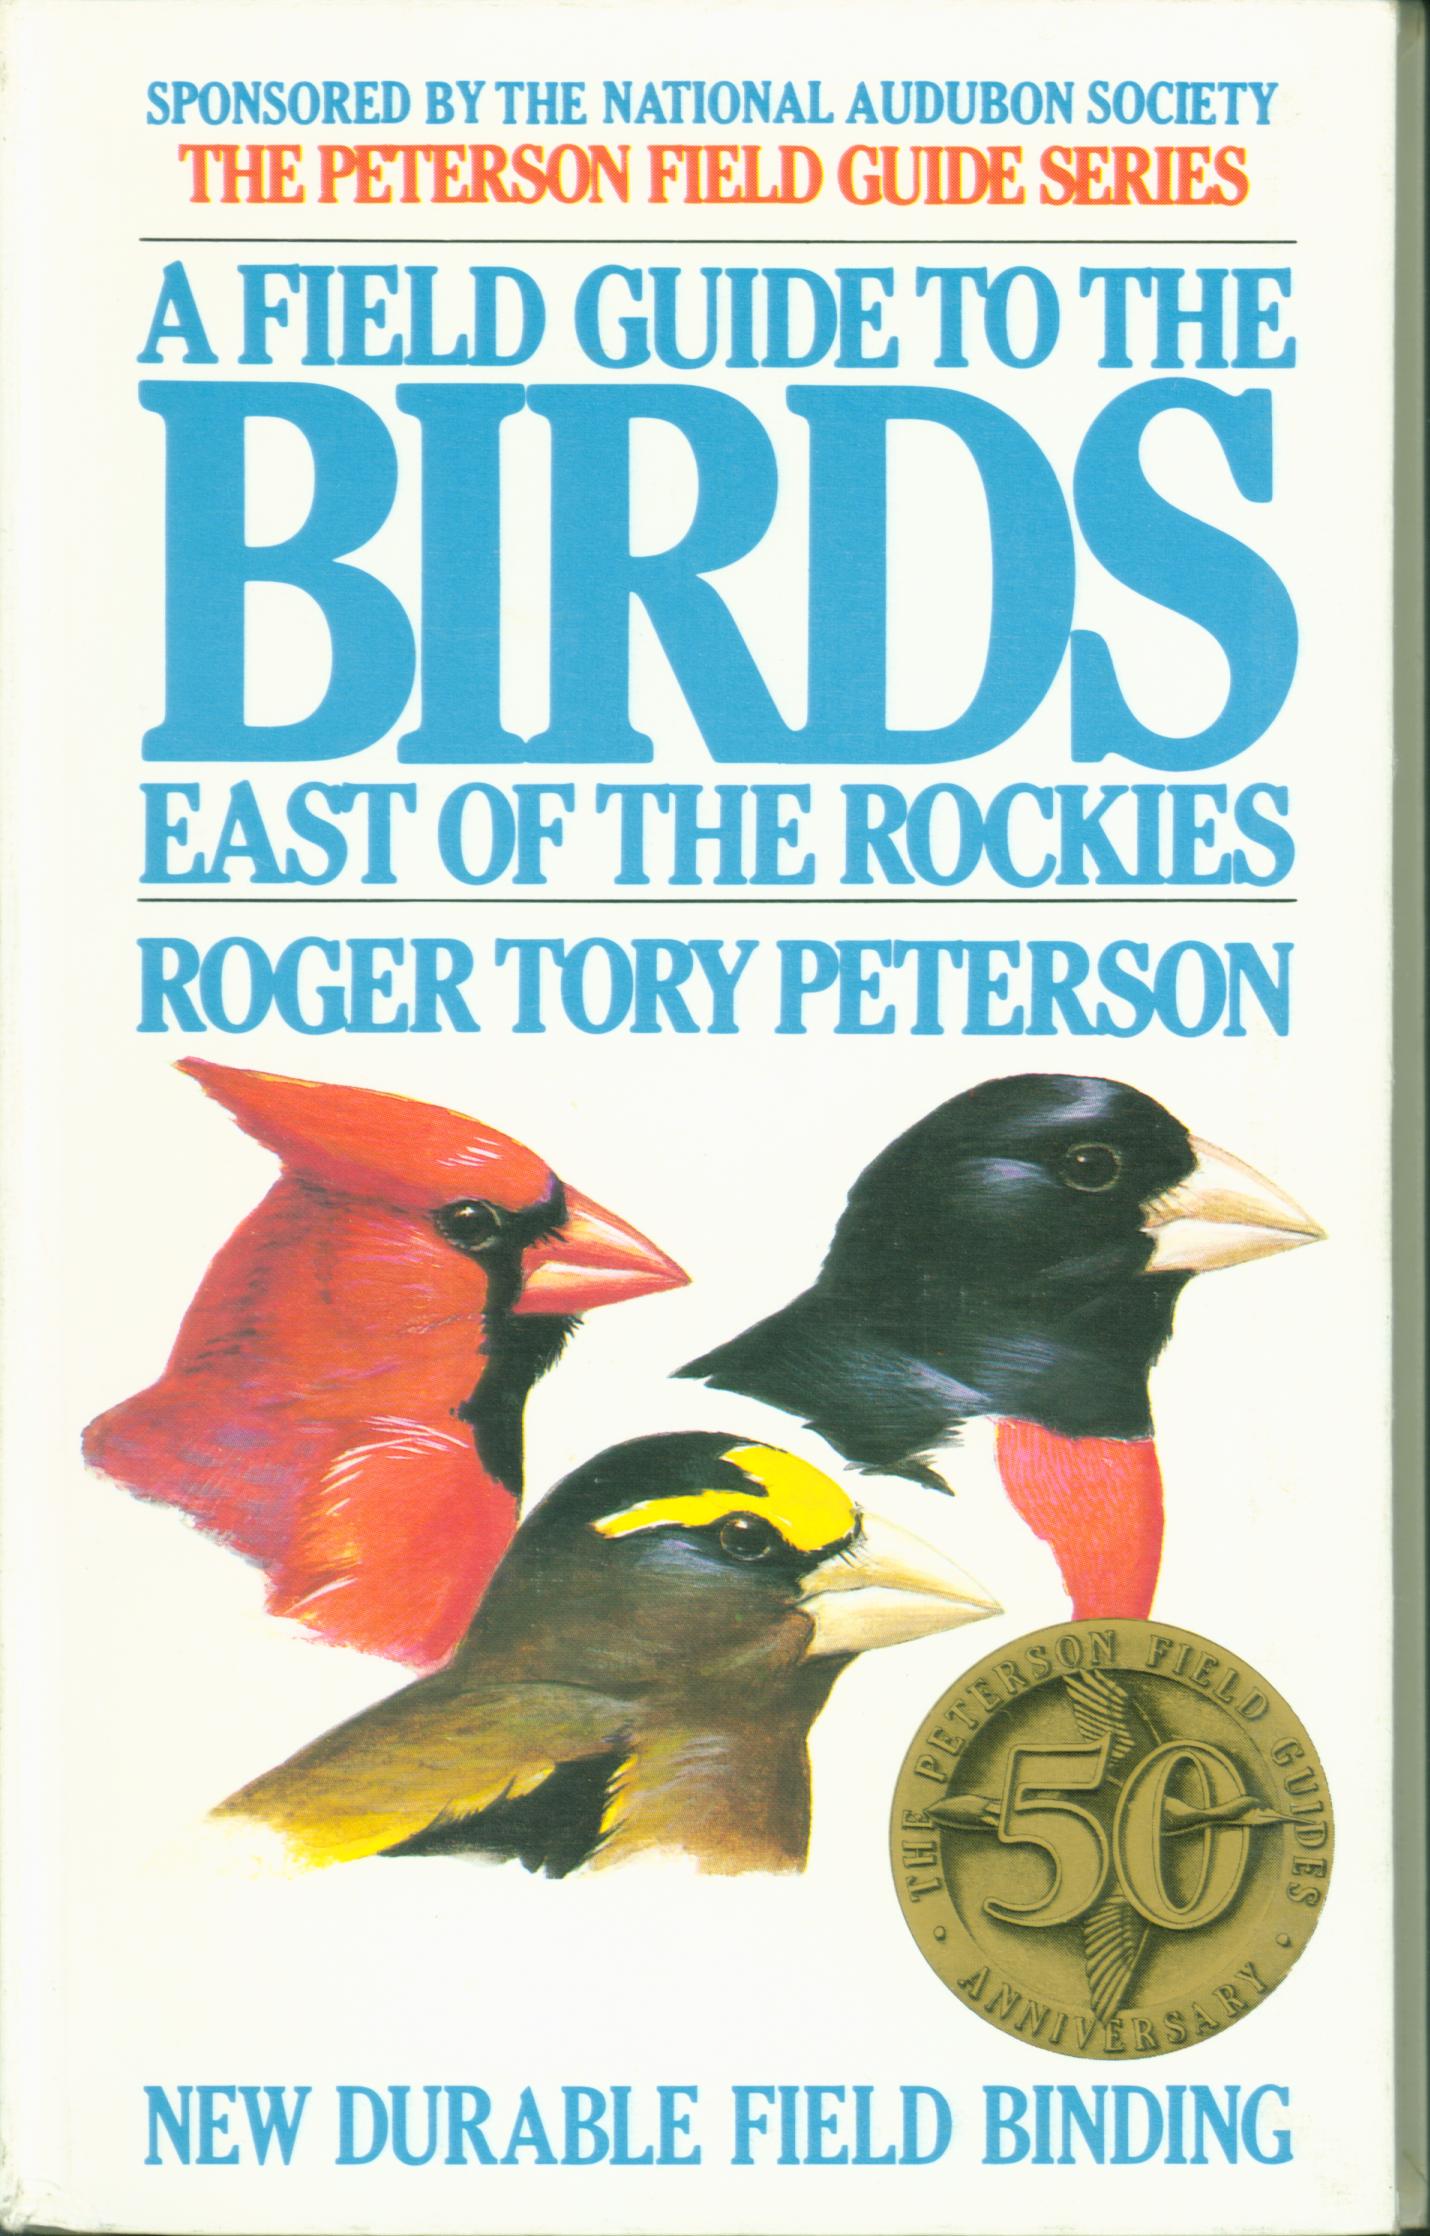 A FIELD GUIDE TO THE BIRDS EAST OF THE ROCKIES